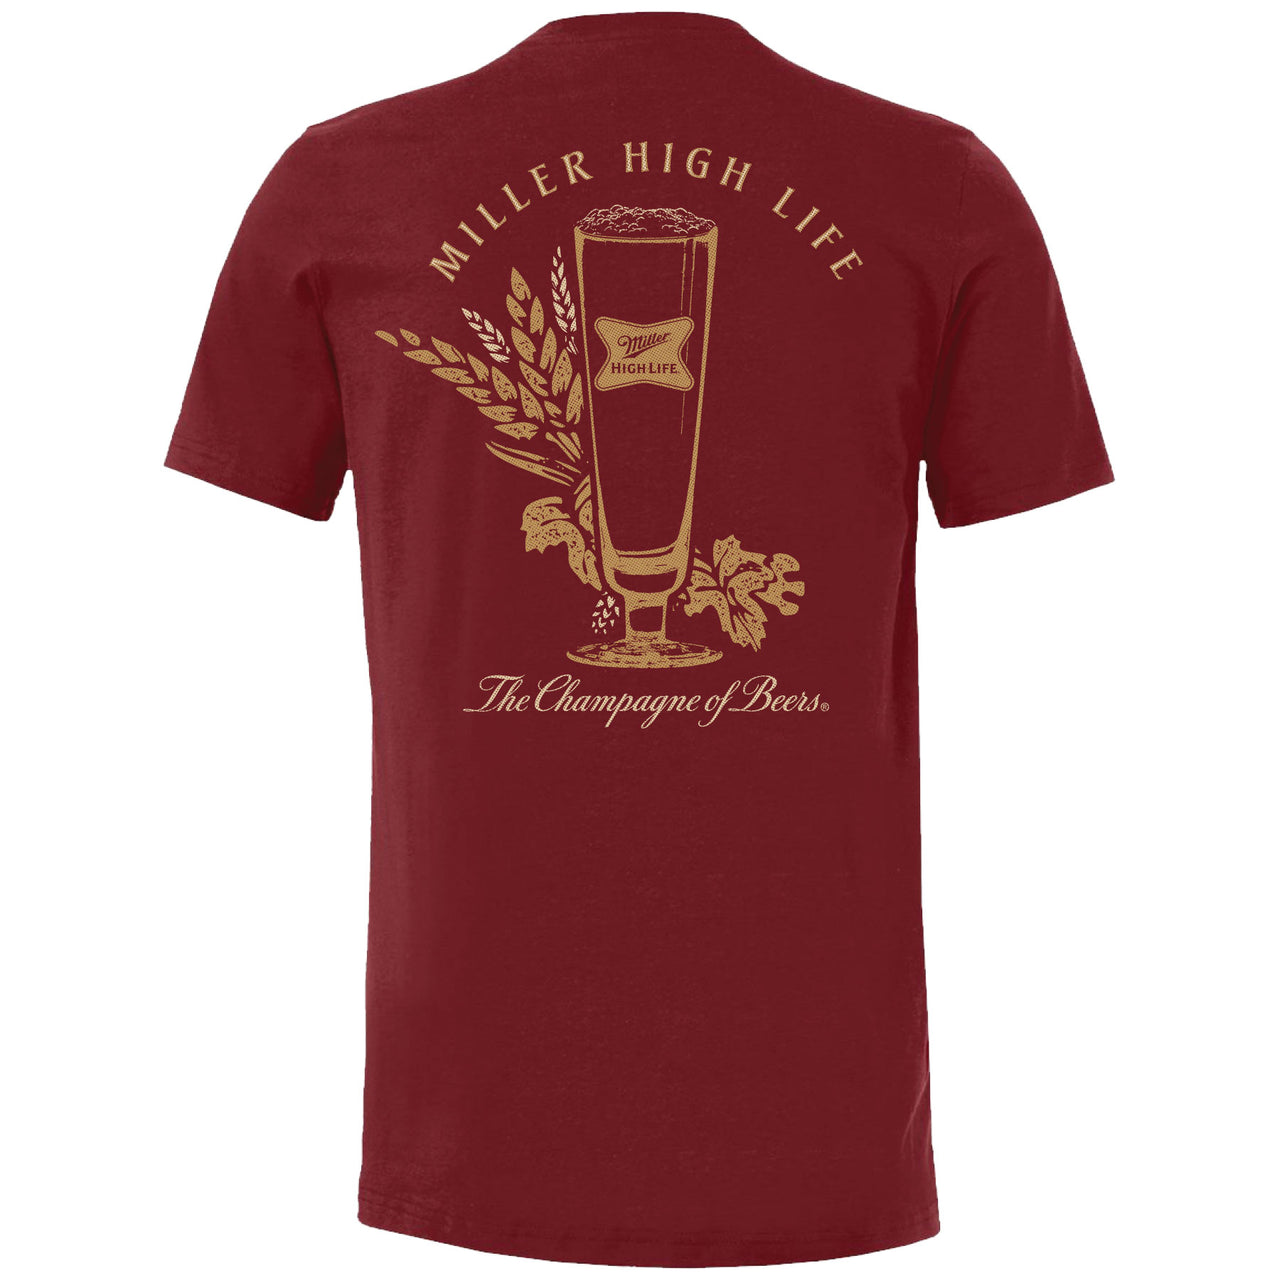 Miller High Life - The Champagne of Beers Glass 2-sided T-shirt